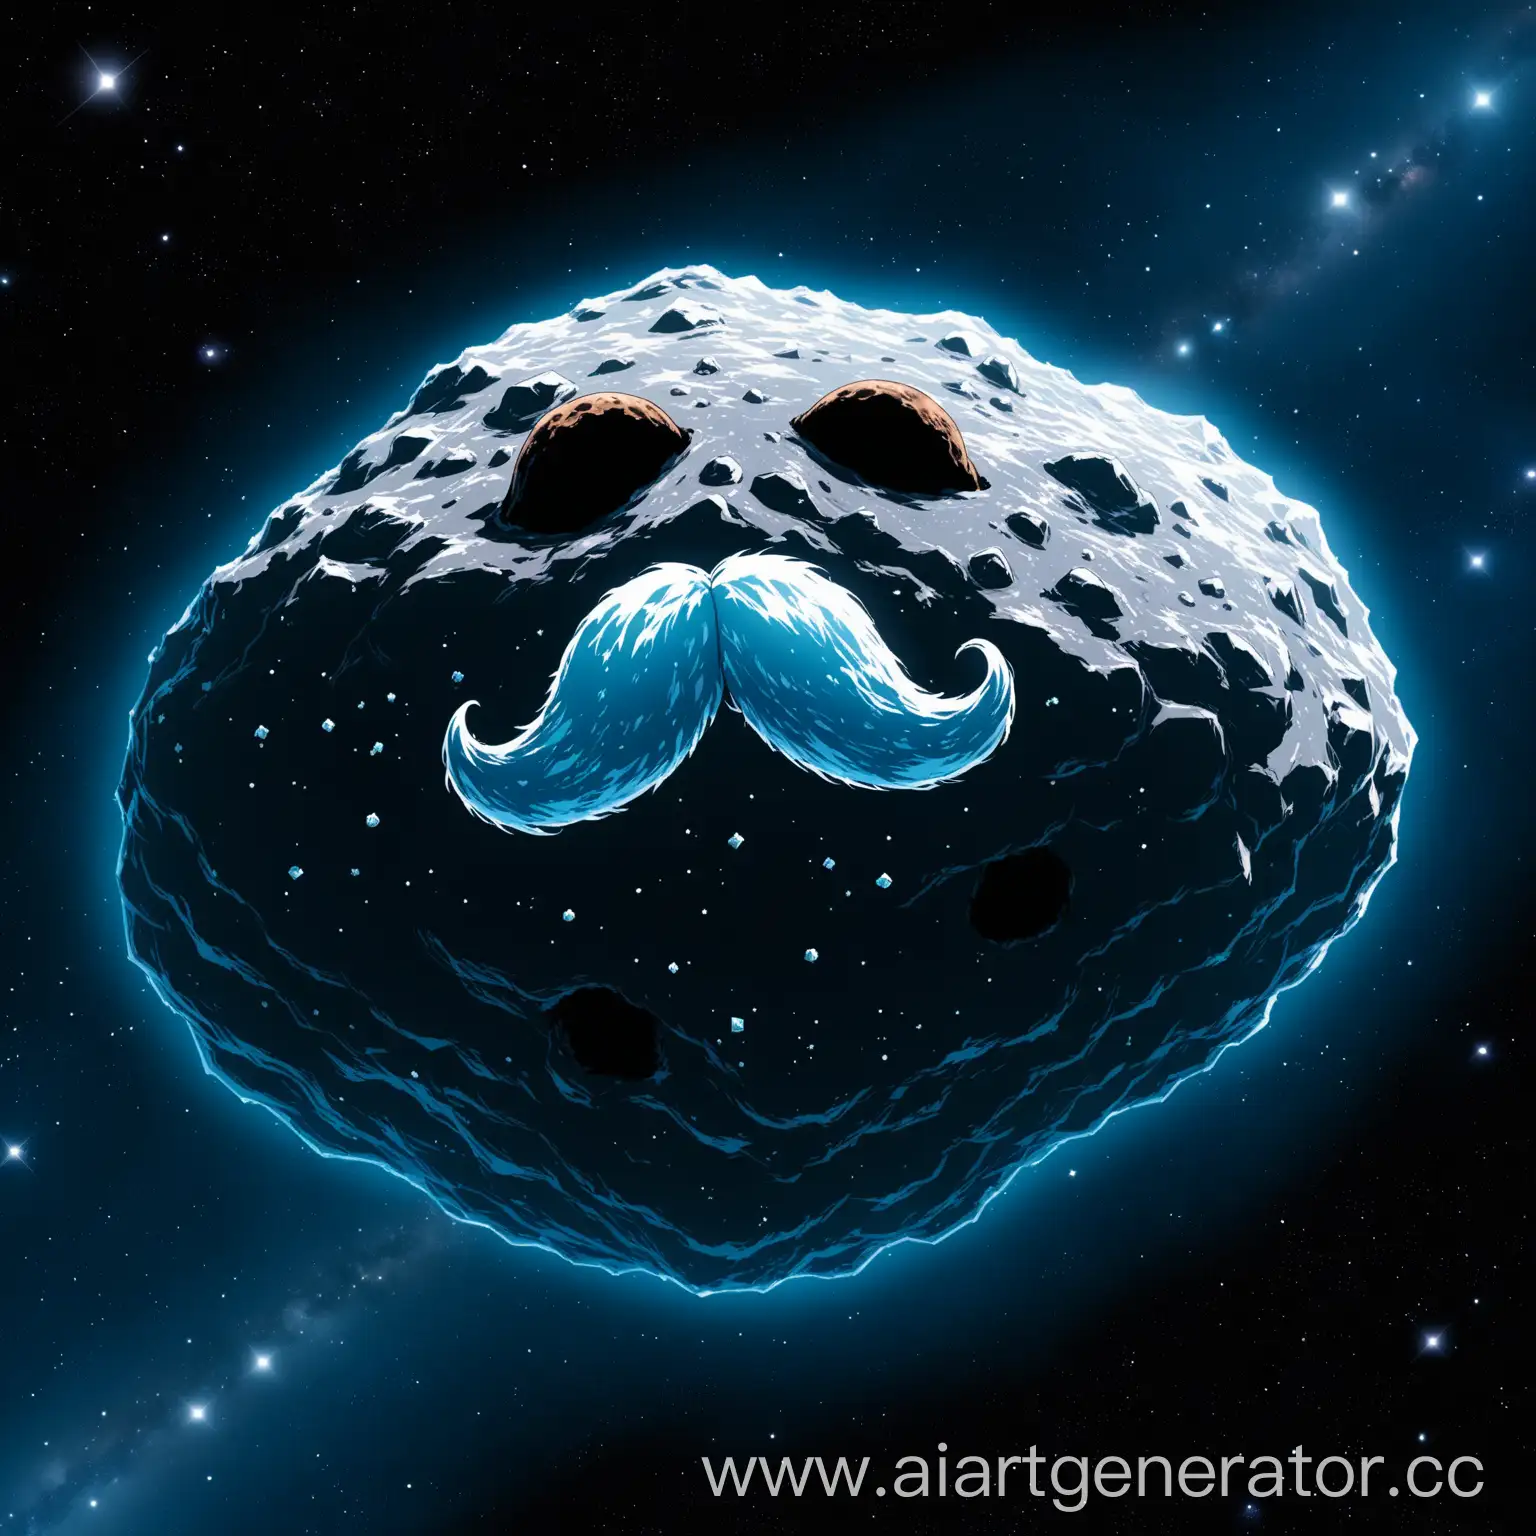 An icy asteroid in space in the form of a mustache